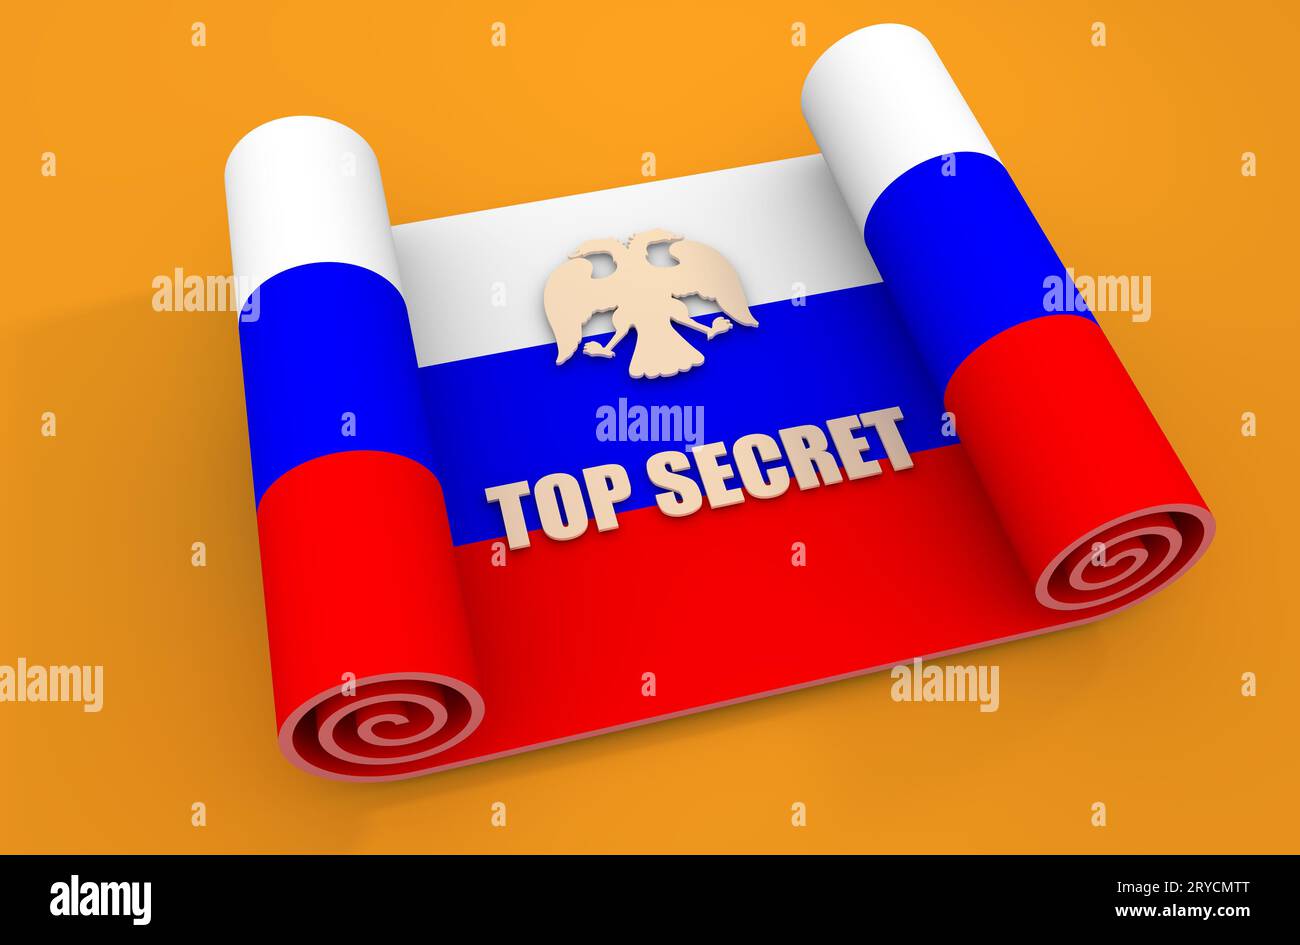 Top secret text on paper scroll textured by Russian flag Stock Photo